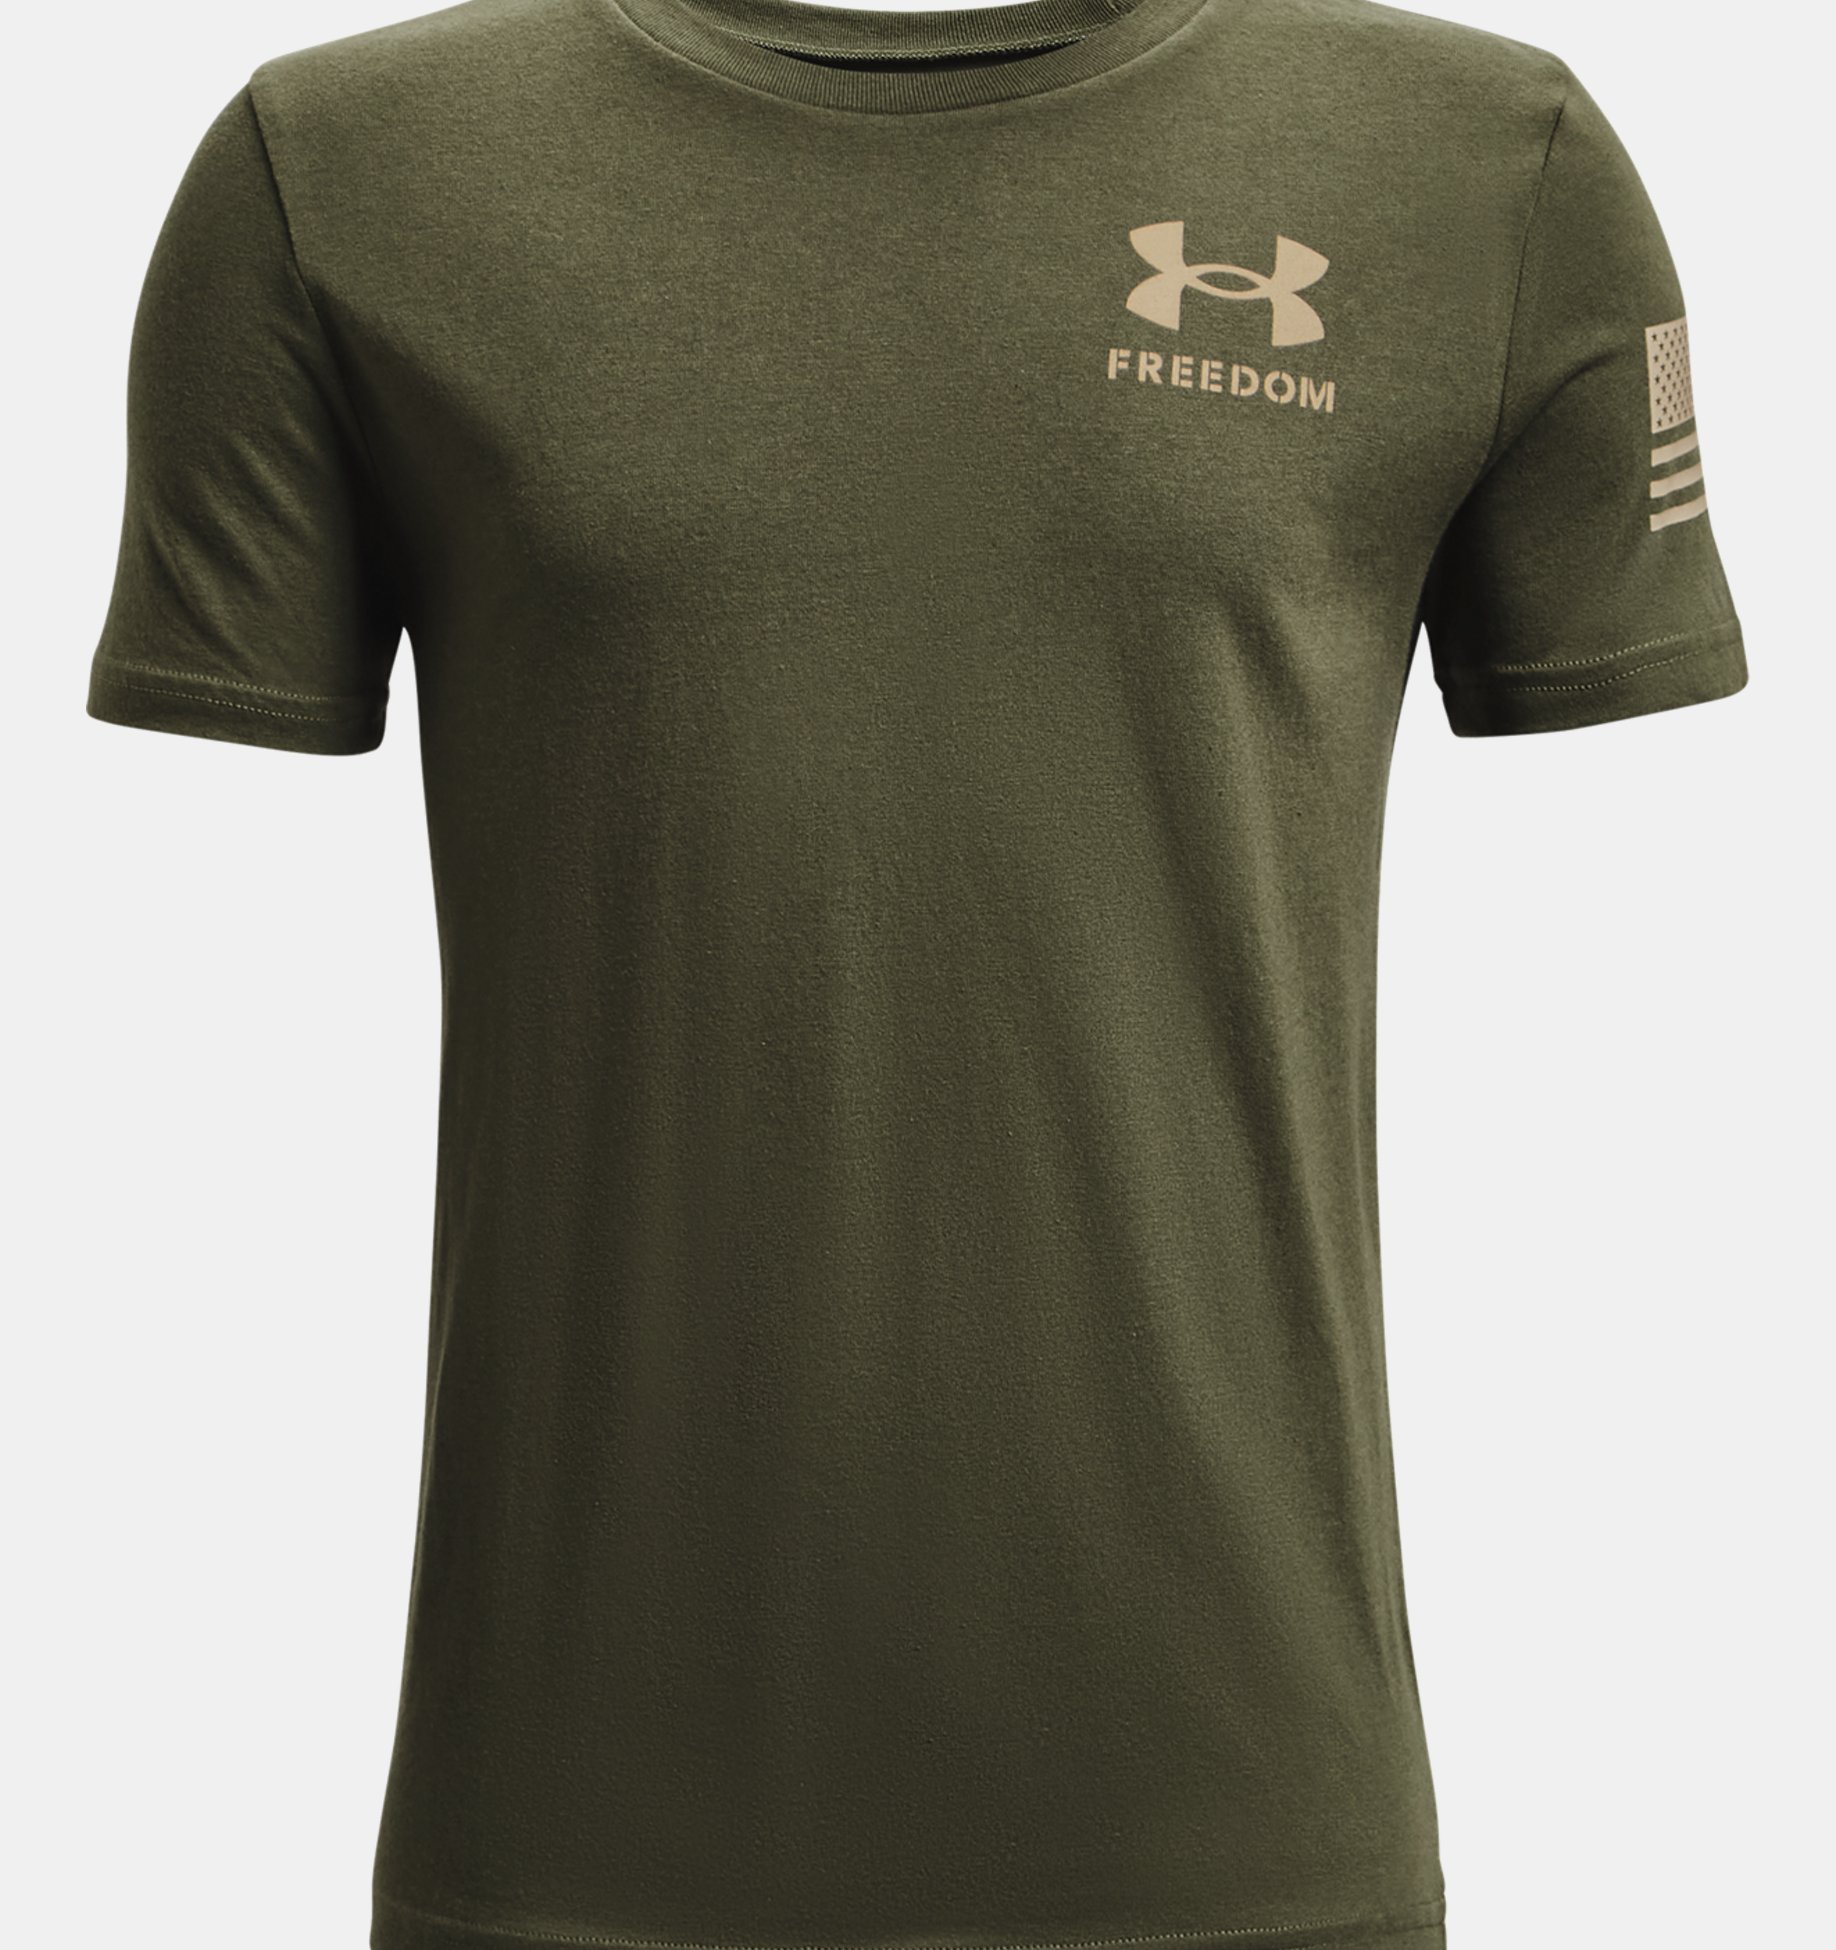 Men's UA Freedom Flag T-Shirt: Everyone makes graphic Ts...but Under Armour makes them better. The fabric we use is light, soft, and quick-drying. *Super-soft, cotton-blend fabric provides all-day comfort *Ribbed collar